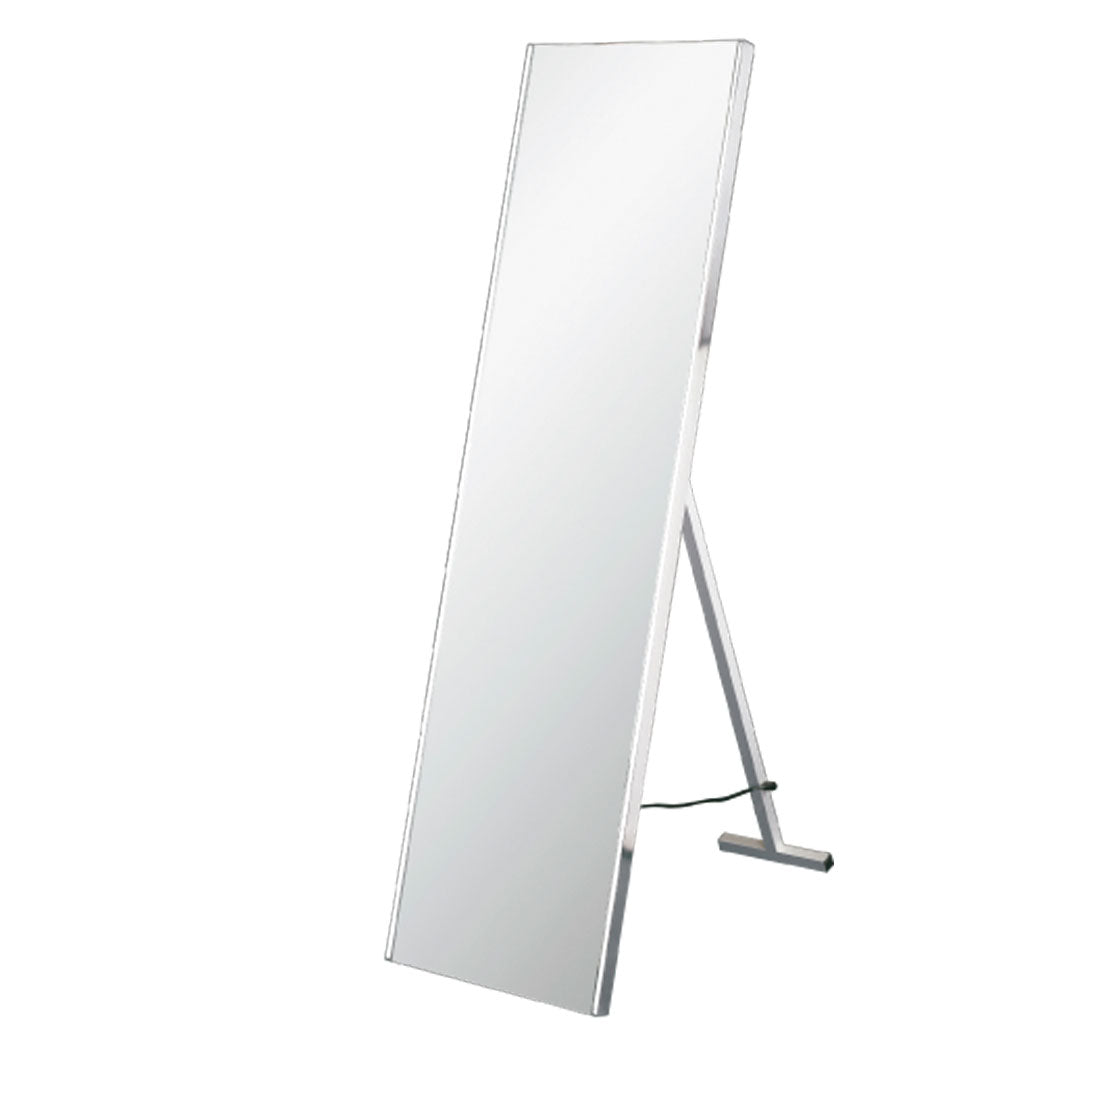 64" DAX Freestanding Mirror - IR Motion sensor with supporting rack and plug. 64"x16.5" (DAX-DL03A-S12160)